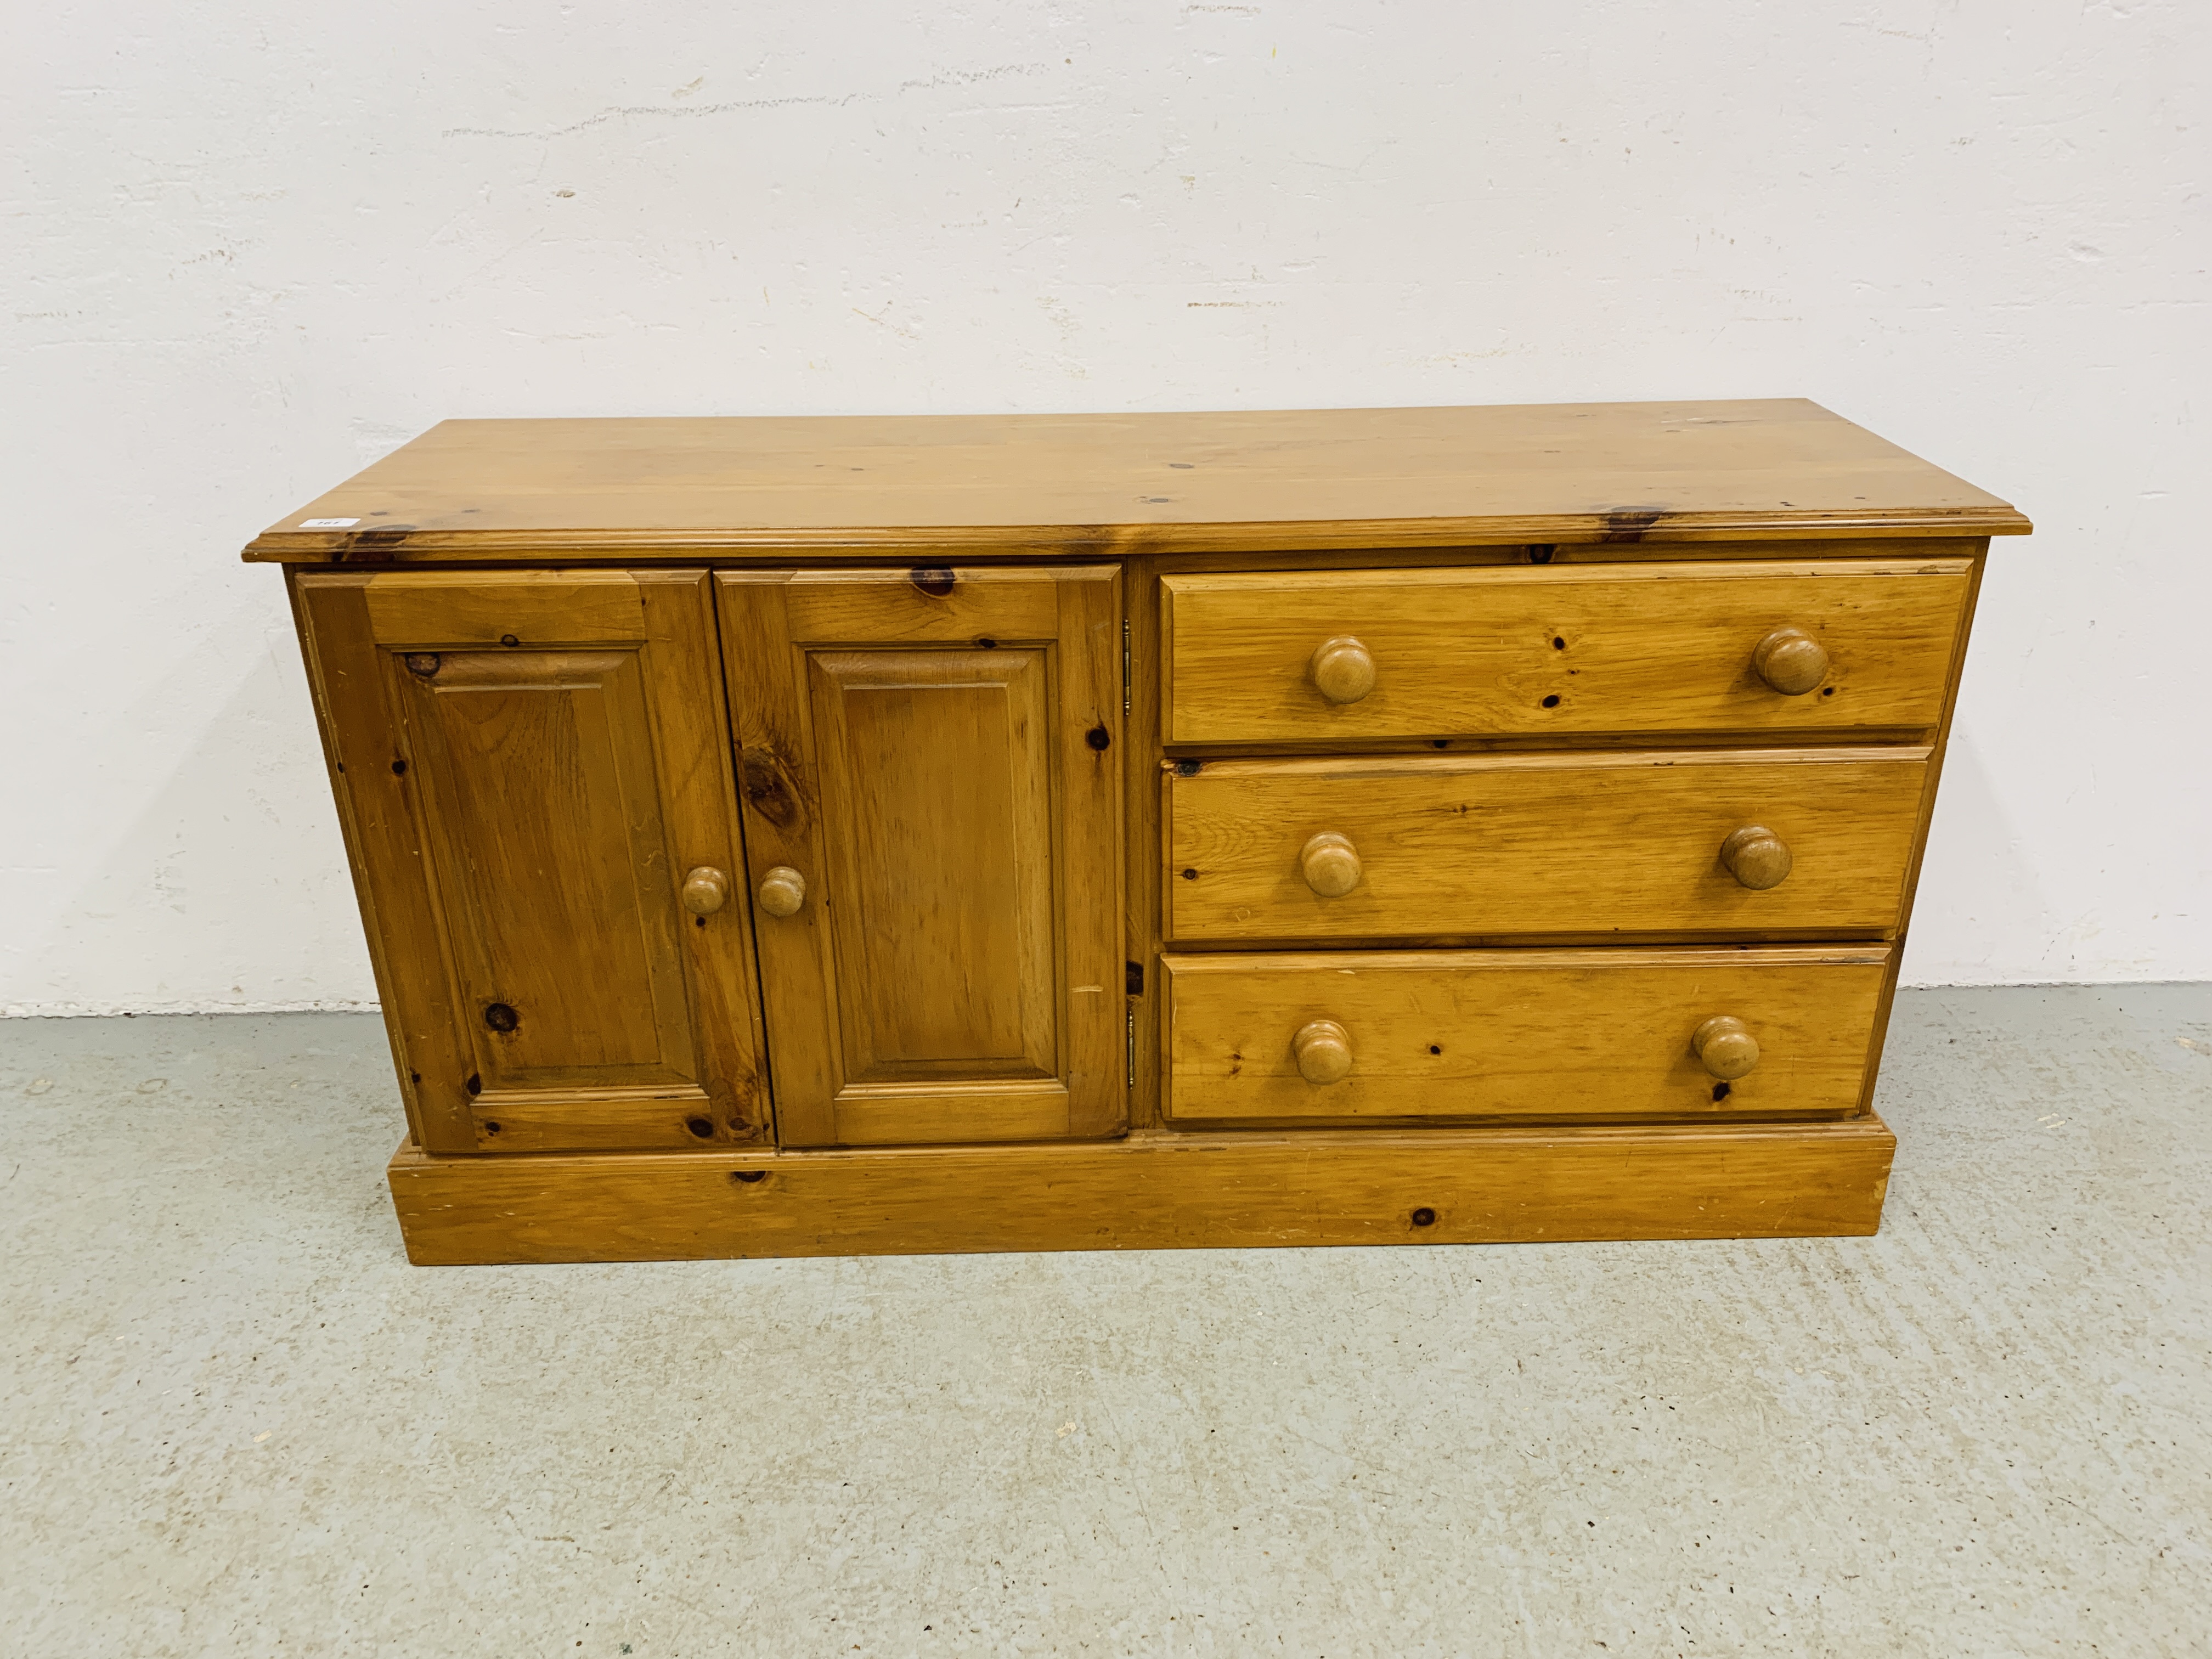 A SOLID HONEY PINE THREE DRAWER DRESSER BASE WITH CABINET TO ONE END - W 130CM. D 41CM. H 66CM.